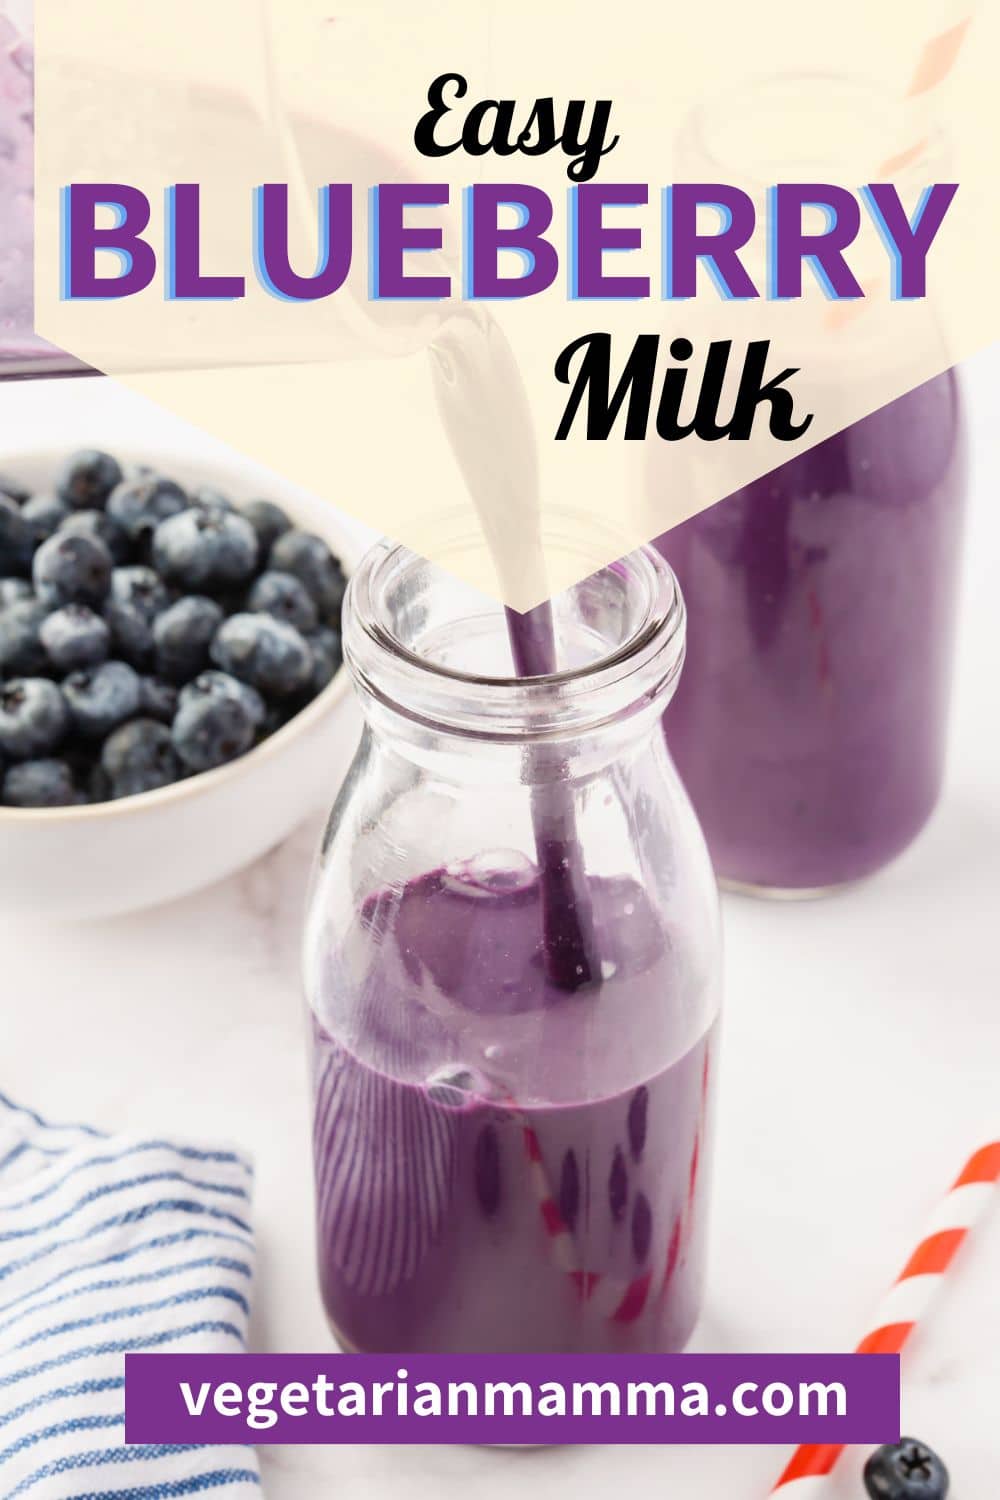 Making homemade blueberry milk is so easy, and such a deliciously creamy, fruity treat! Learn how to make blueberry milk at home with just 4 simple, fresh ingredients.